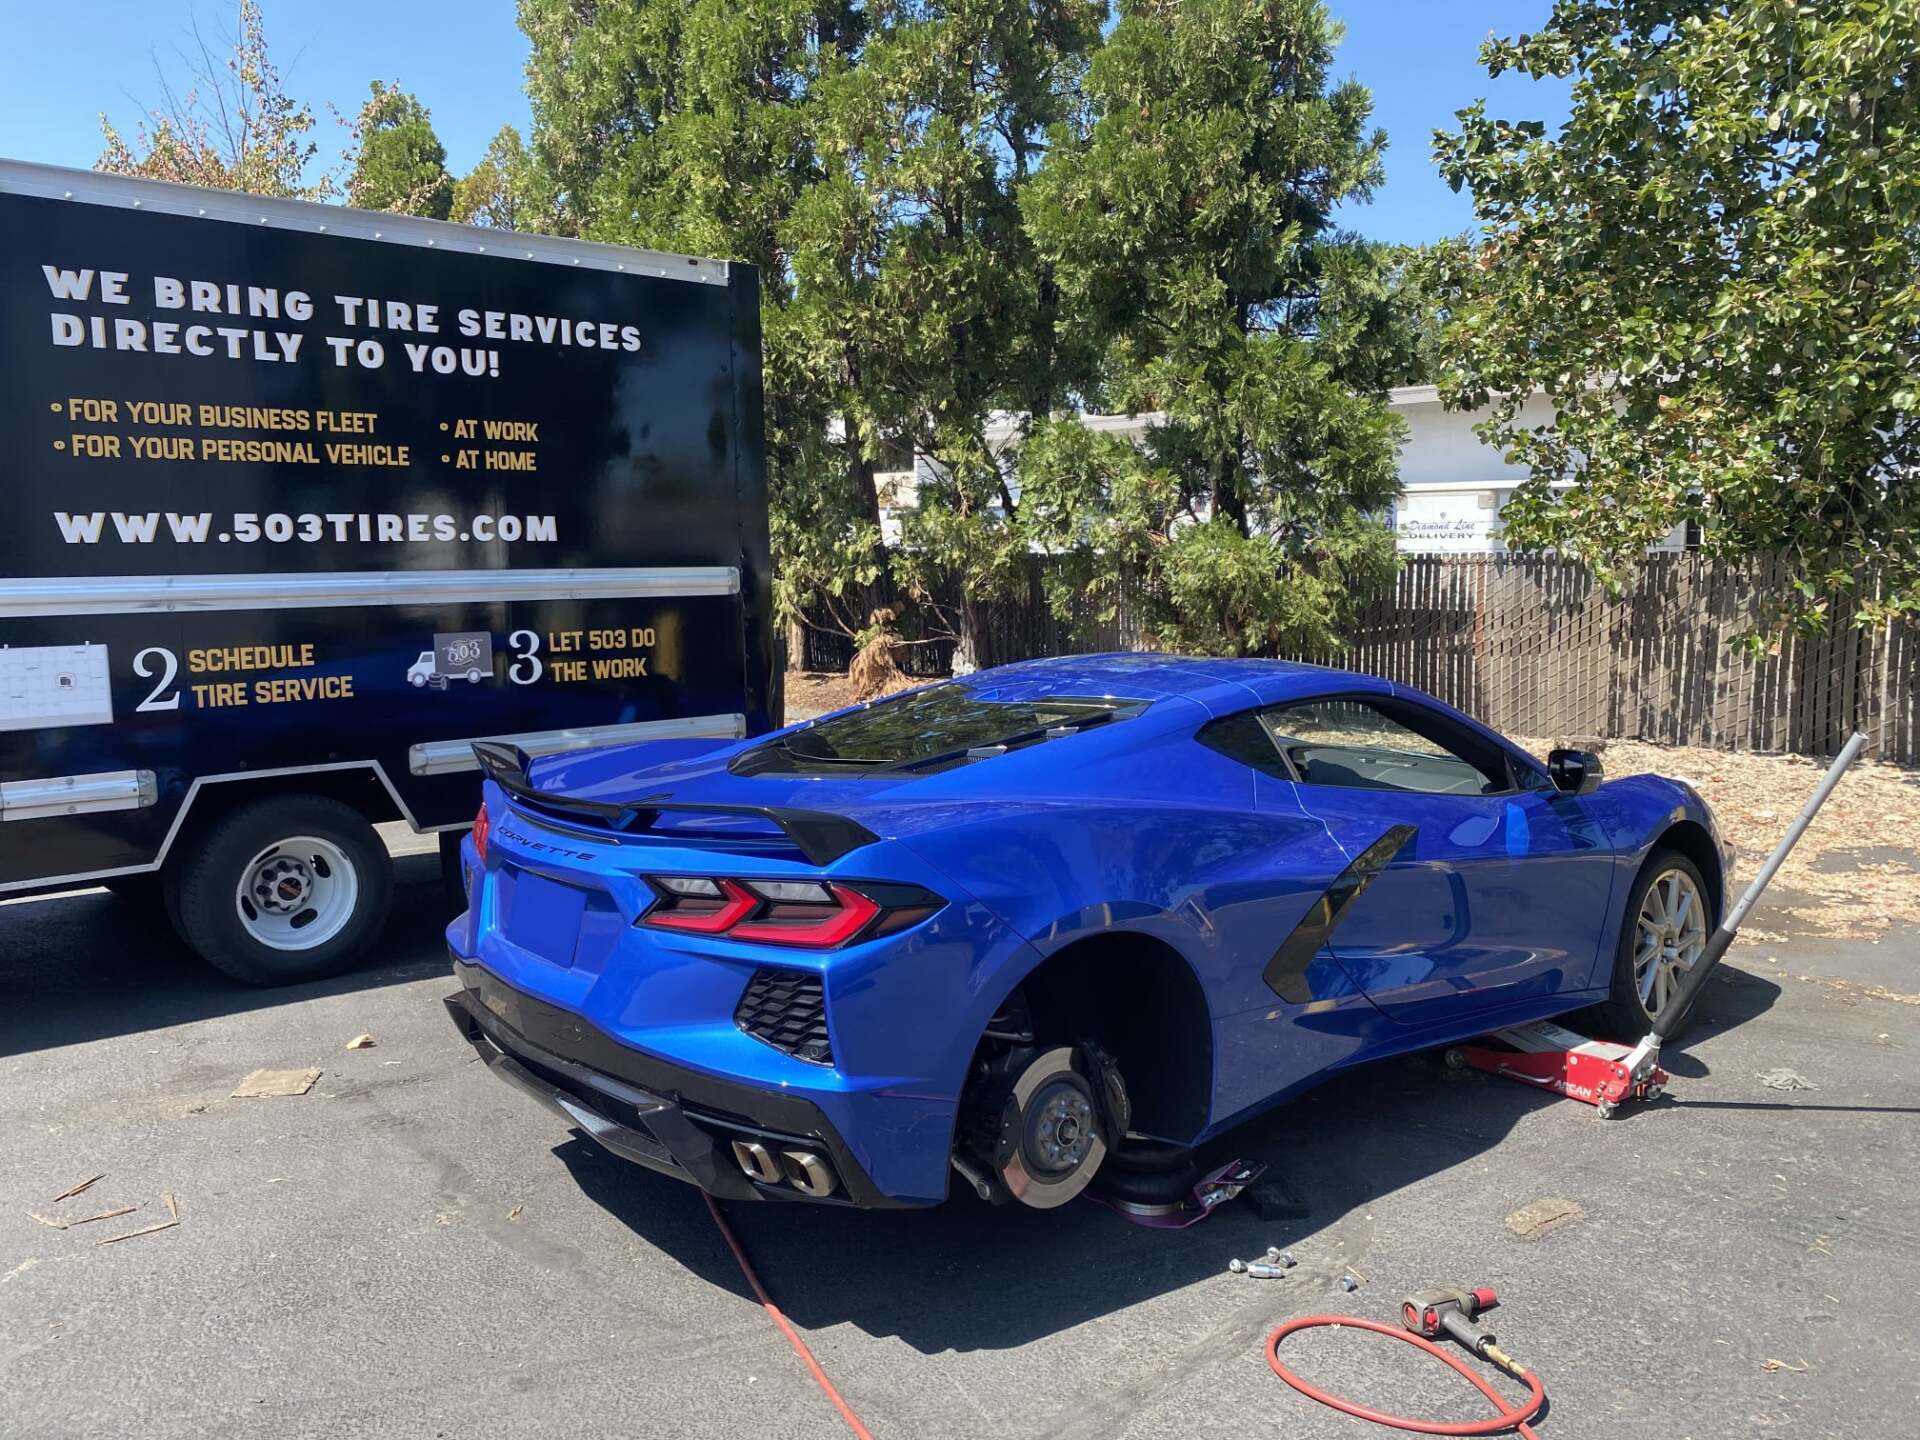 New Tires getting put on a blue sports car.